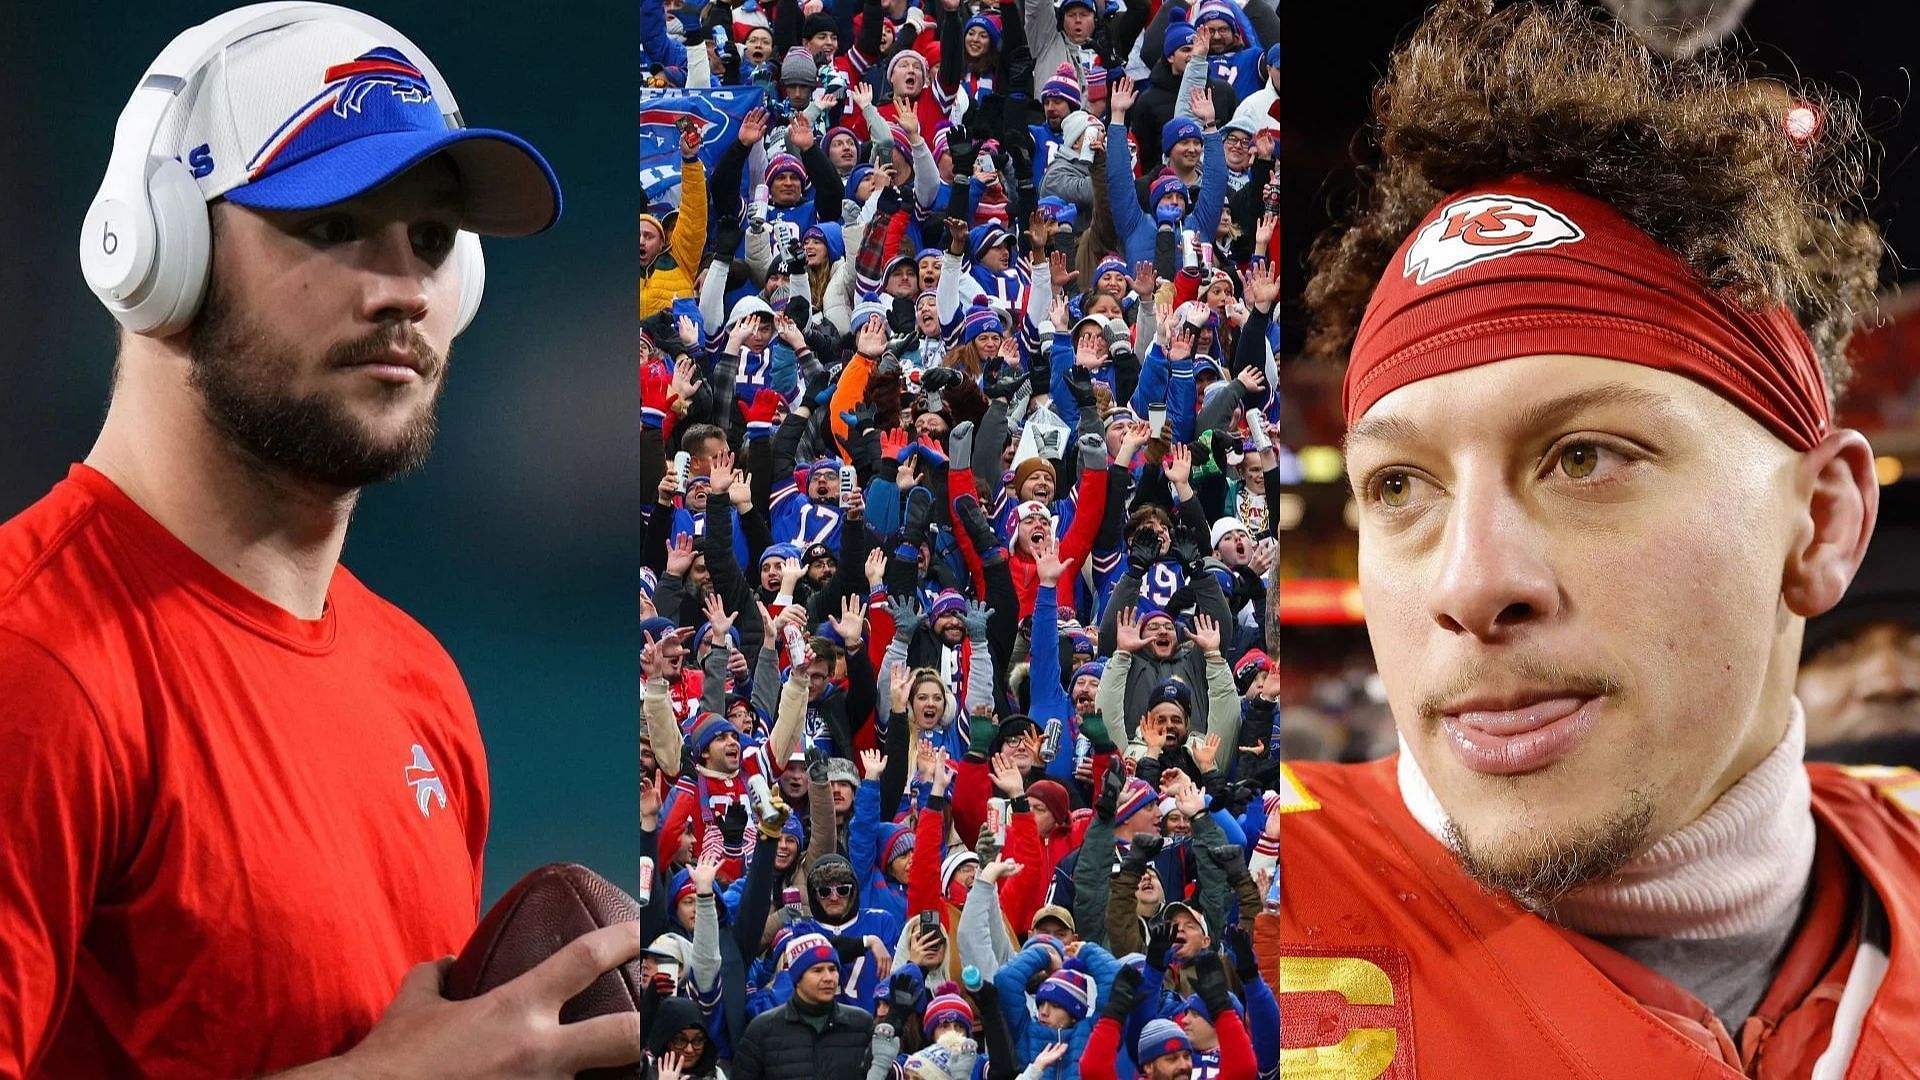 Buffalo Bills will cheer loudly for Josh Allen as he faces Patrick Mahomes and the Kansas City Chiefs in the Divisional Round.